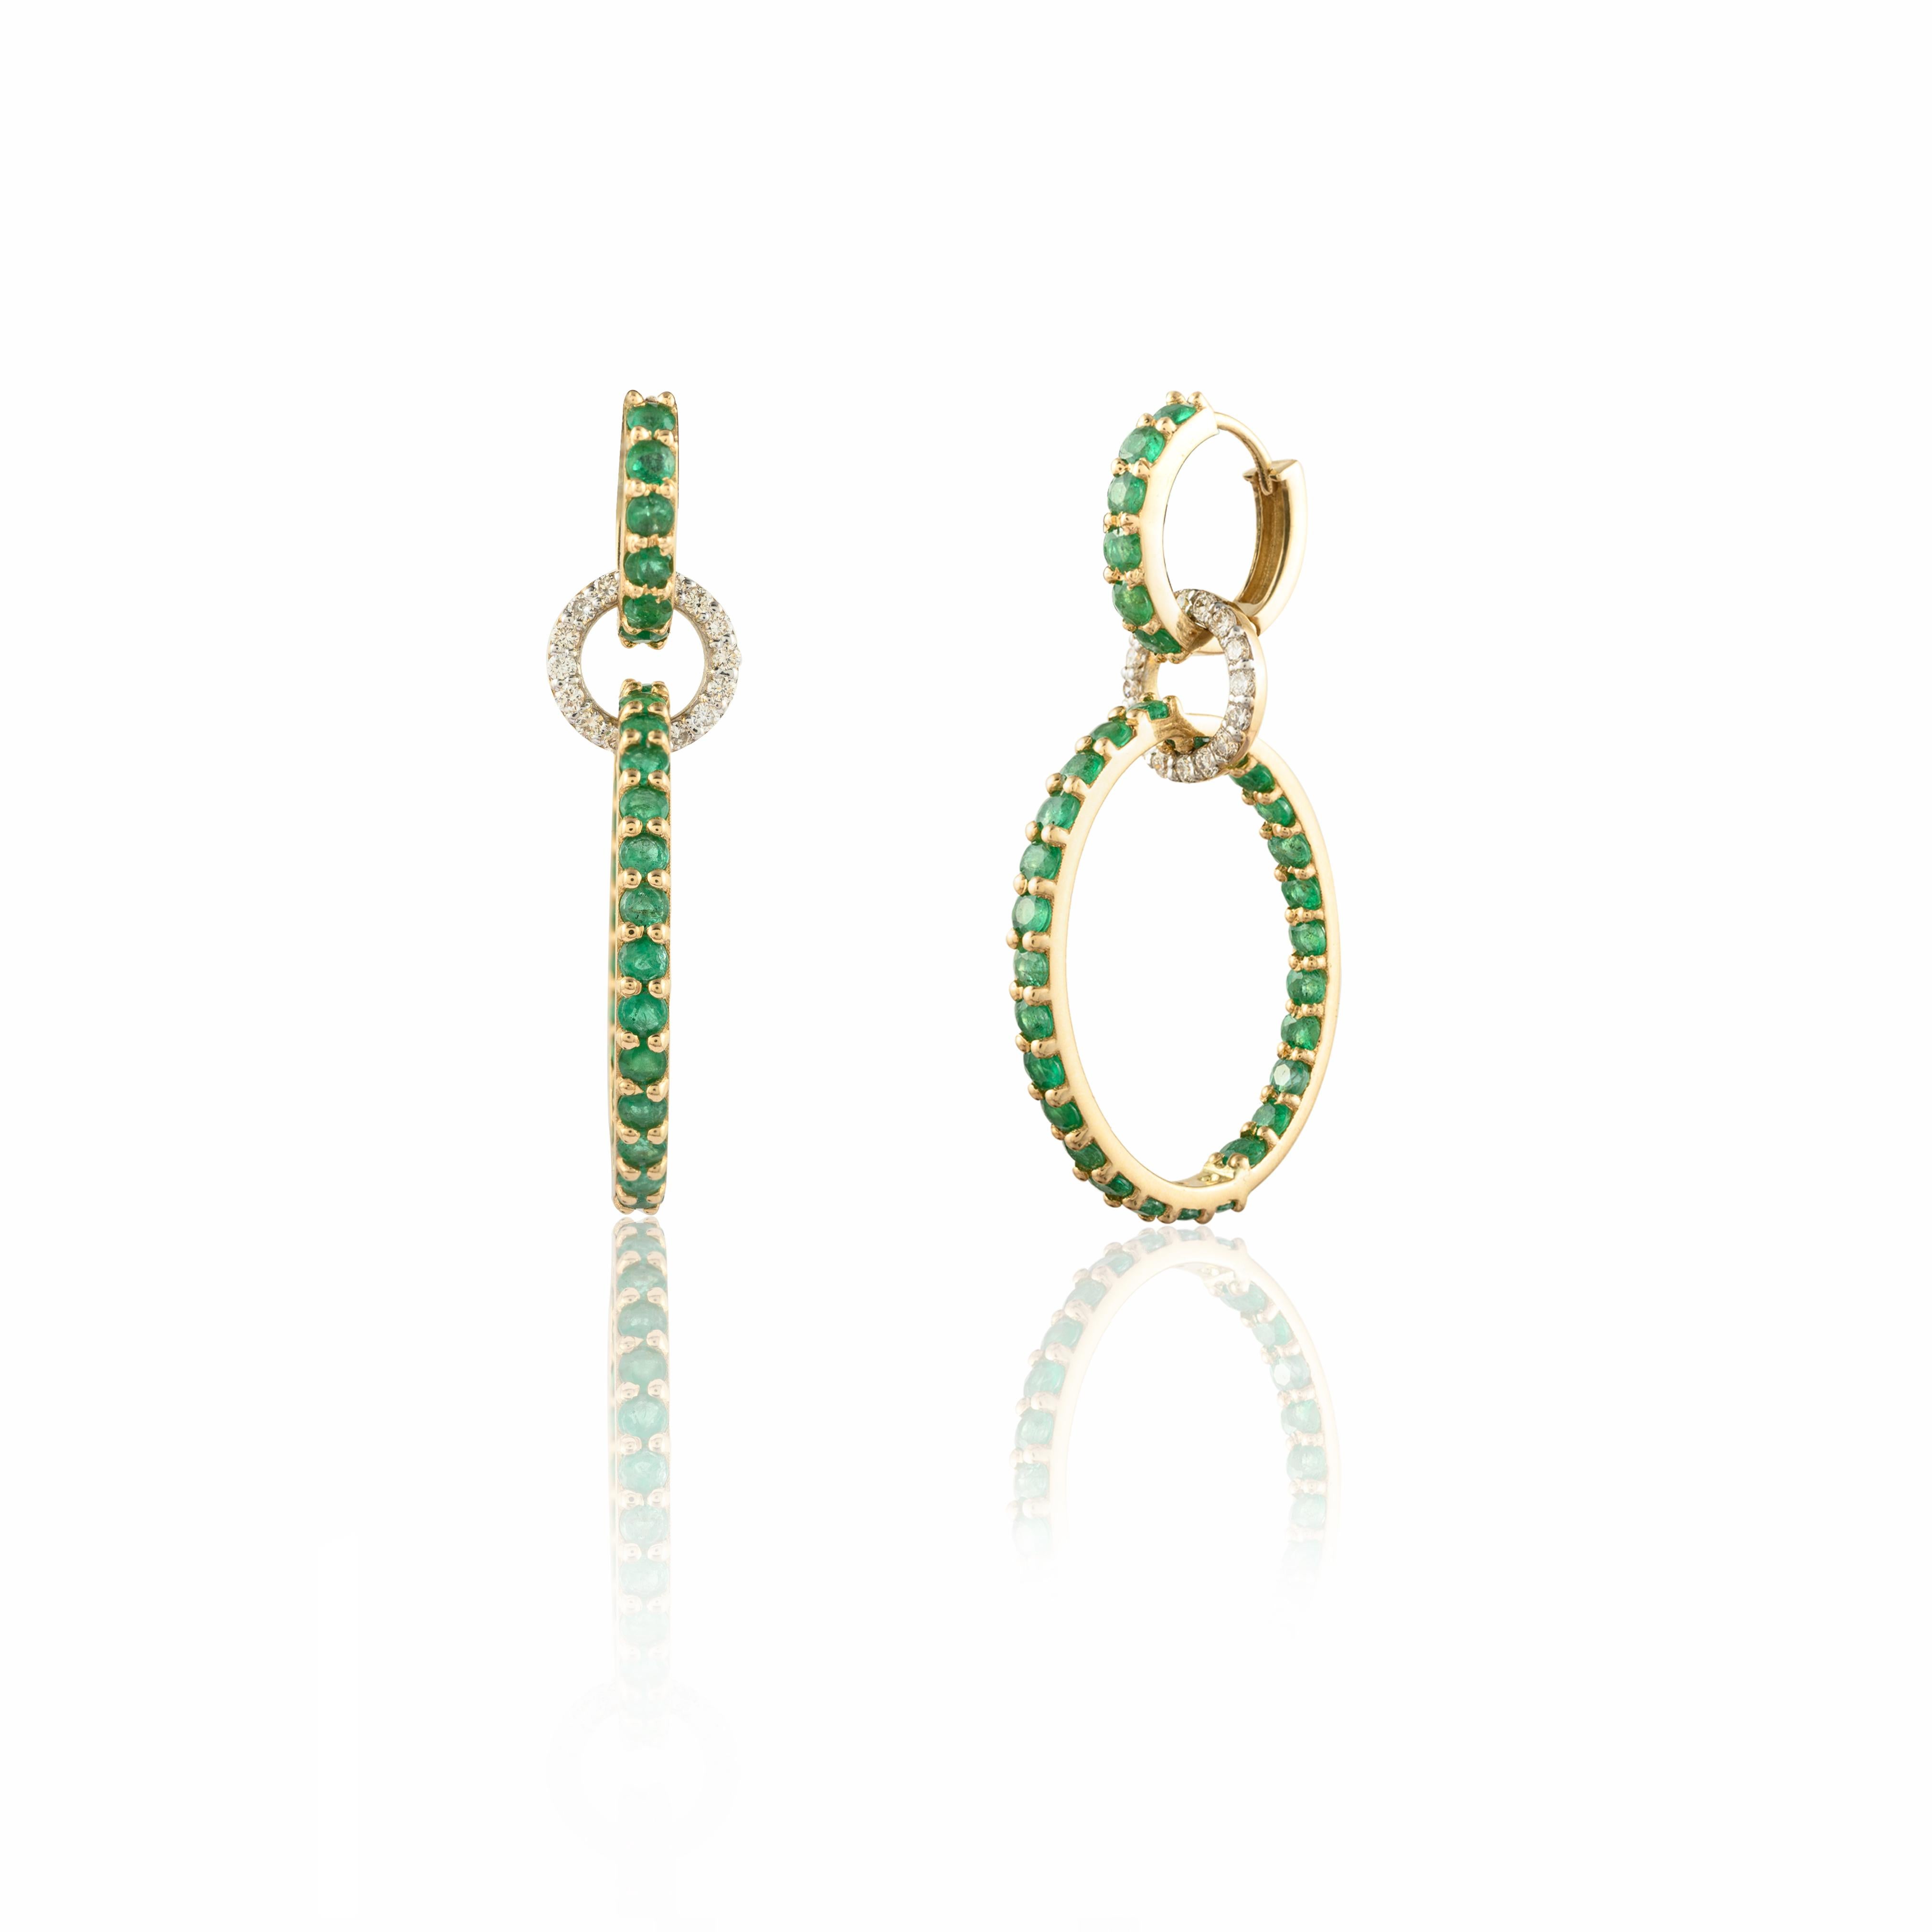 Diamond and 3.85 ct Emerald Linked Ring Dangle Earrings in 14K Solid Yellow Gold In New Condition For Sale In Houston, TX